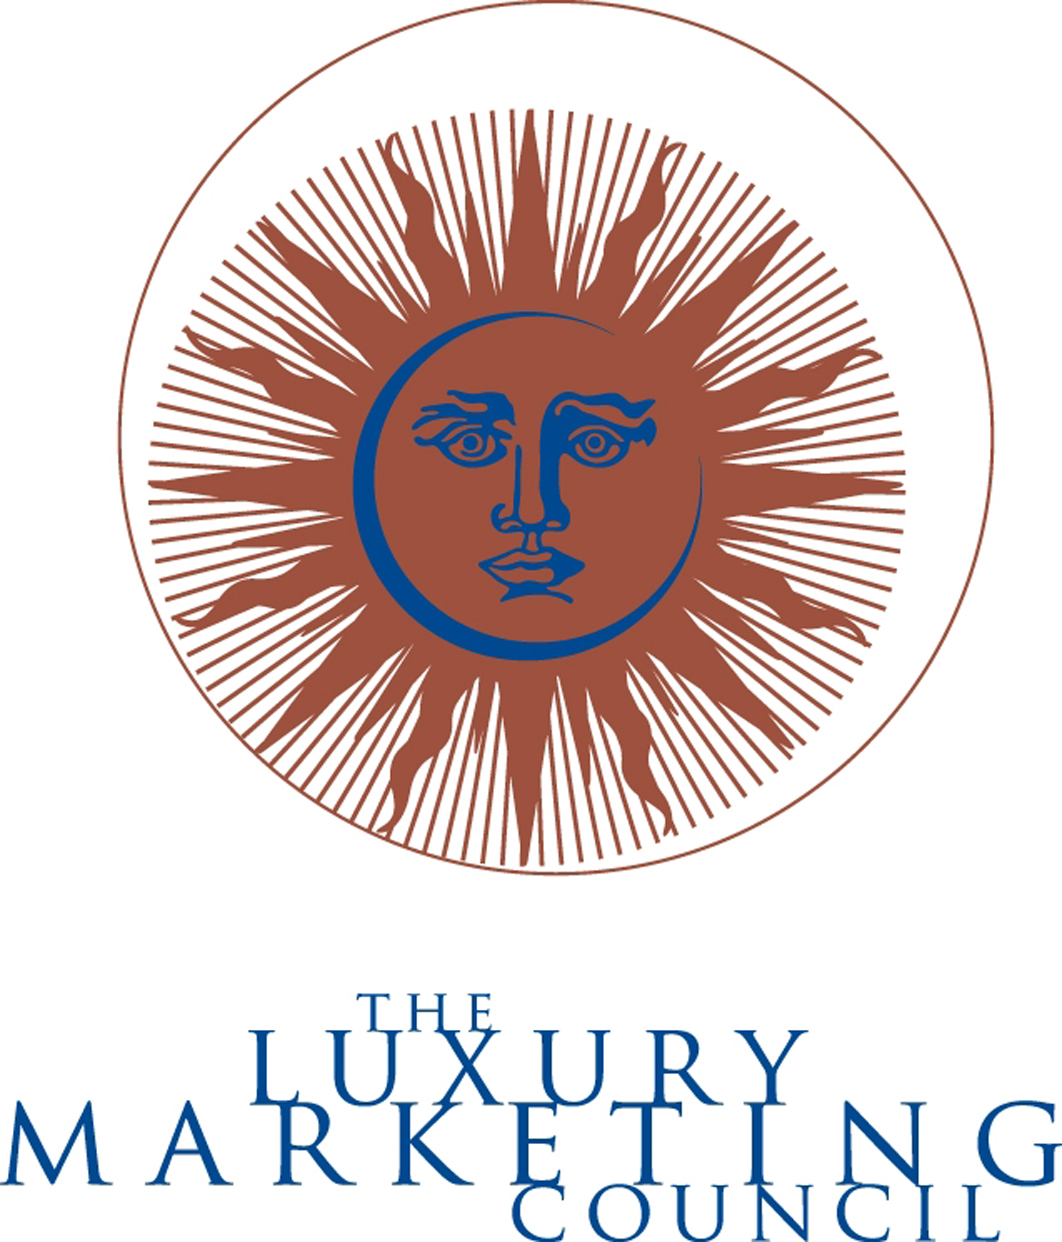 The Luxury Marketing Council